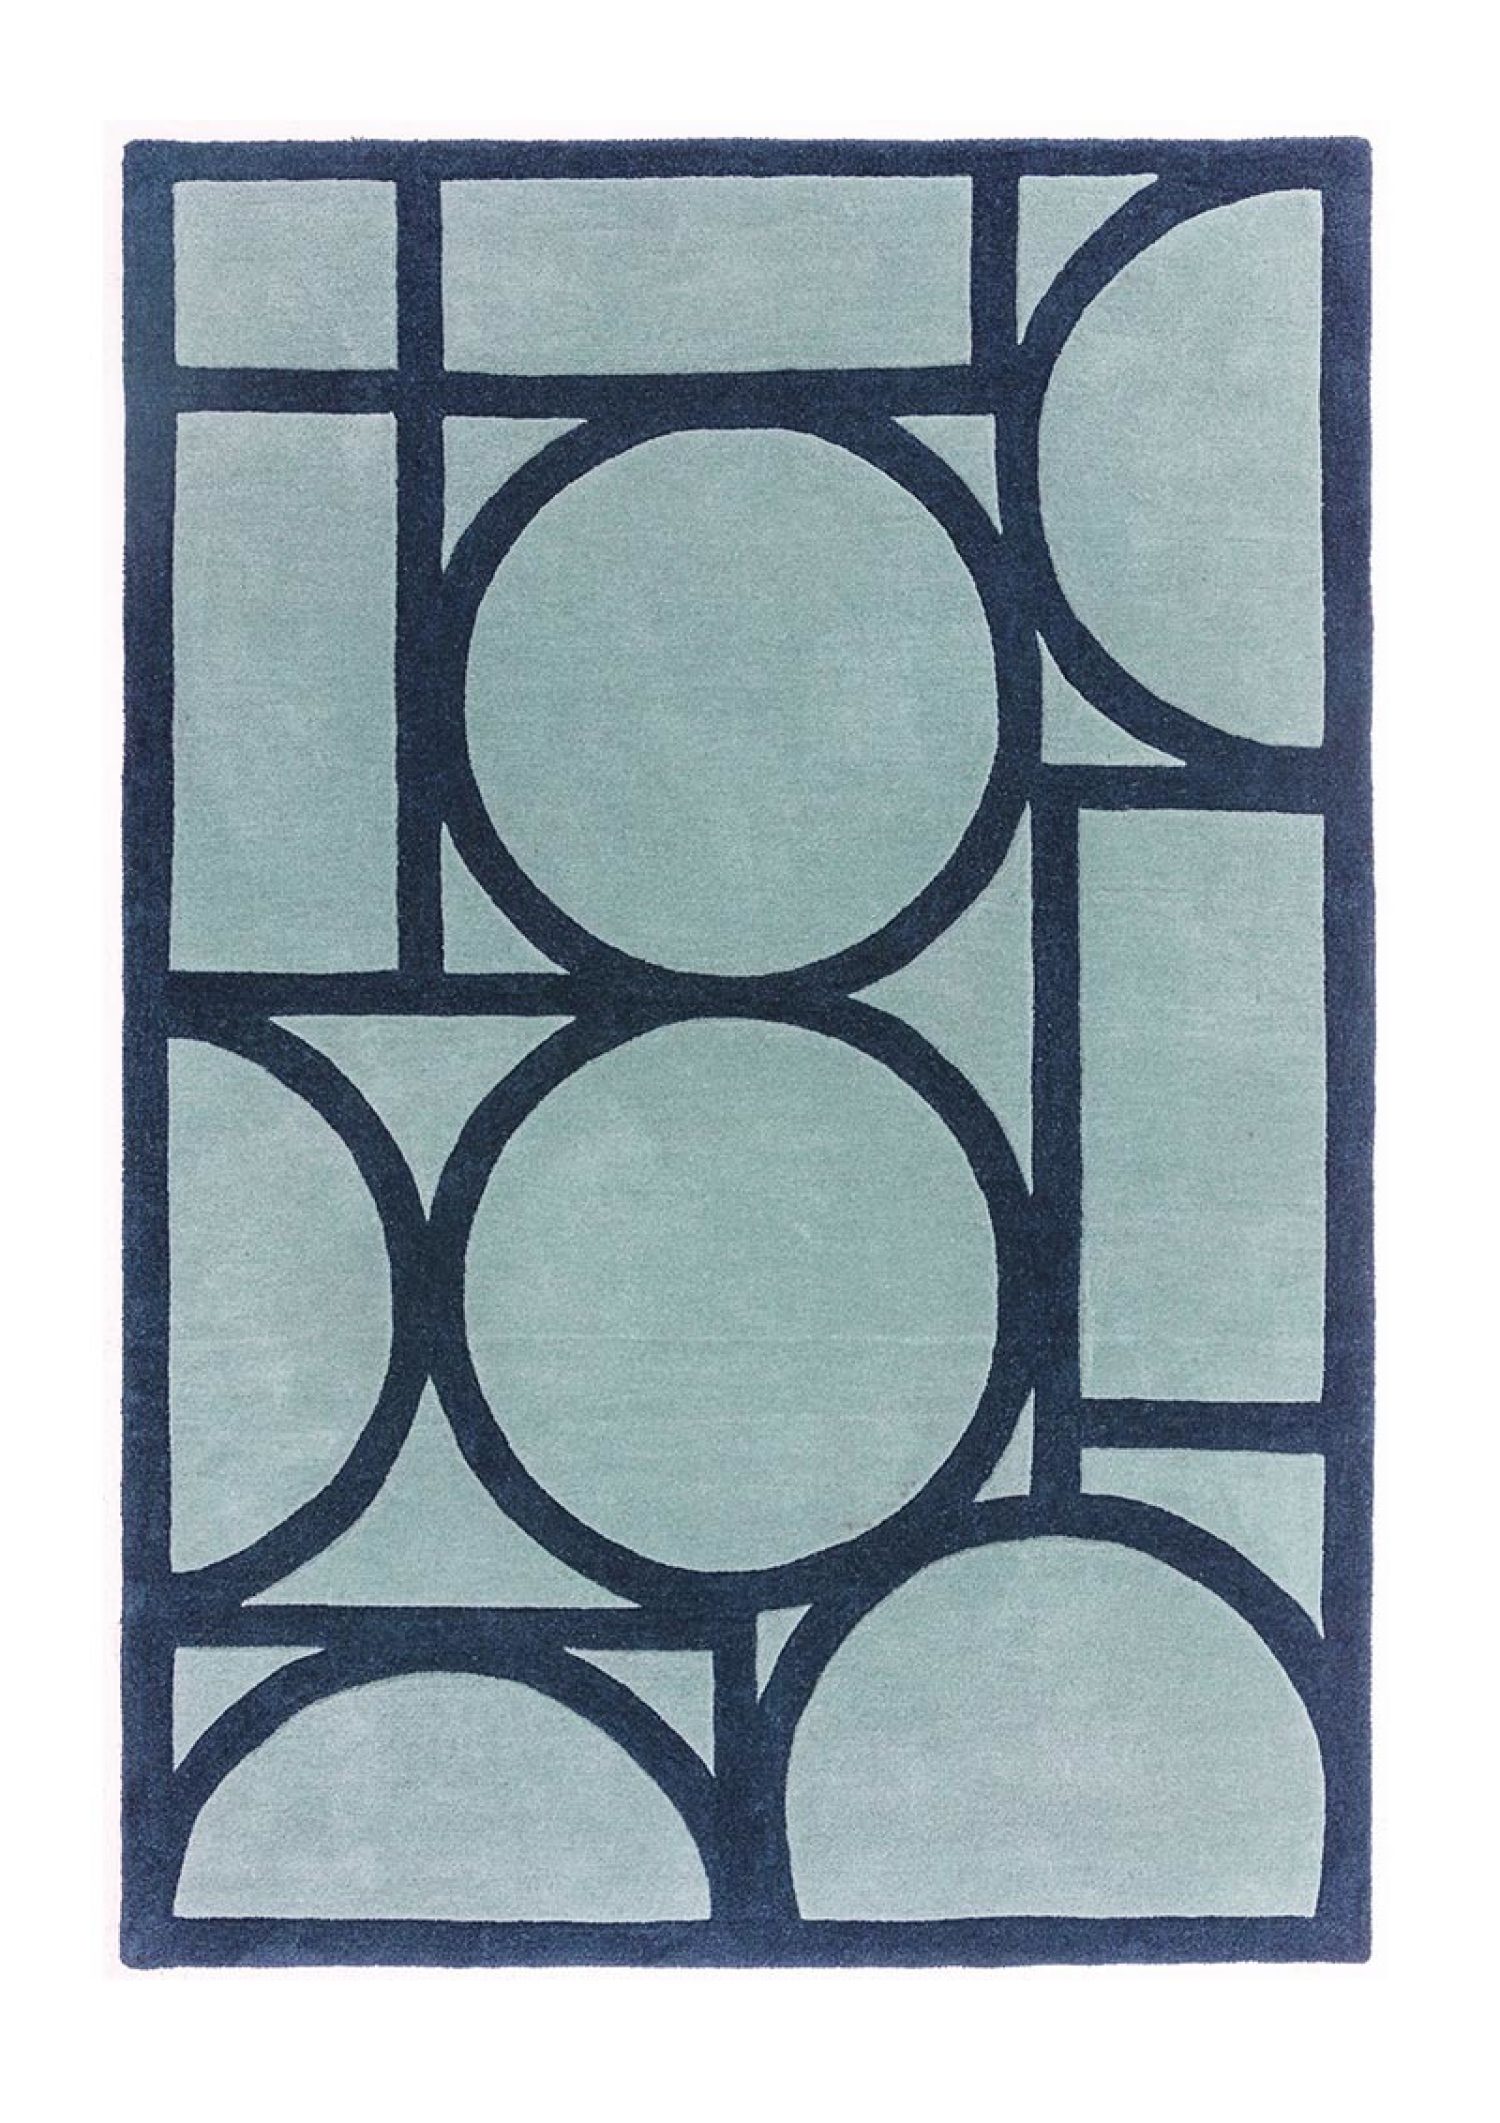 From the living room to the bedroom, this blue rug compliments any space.